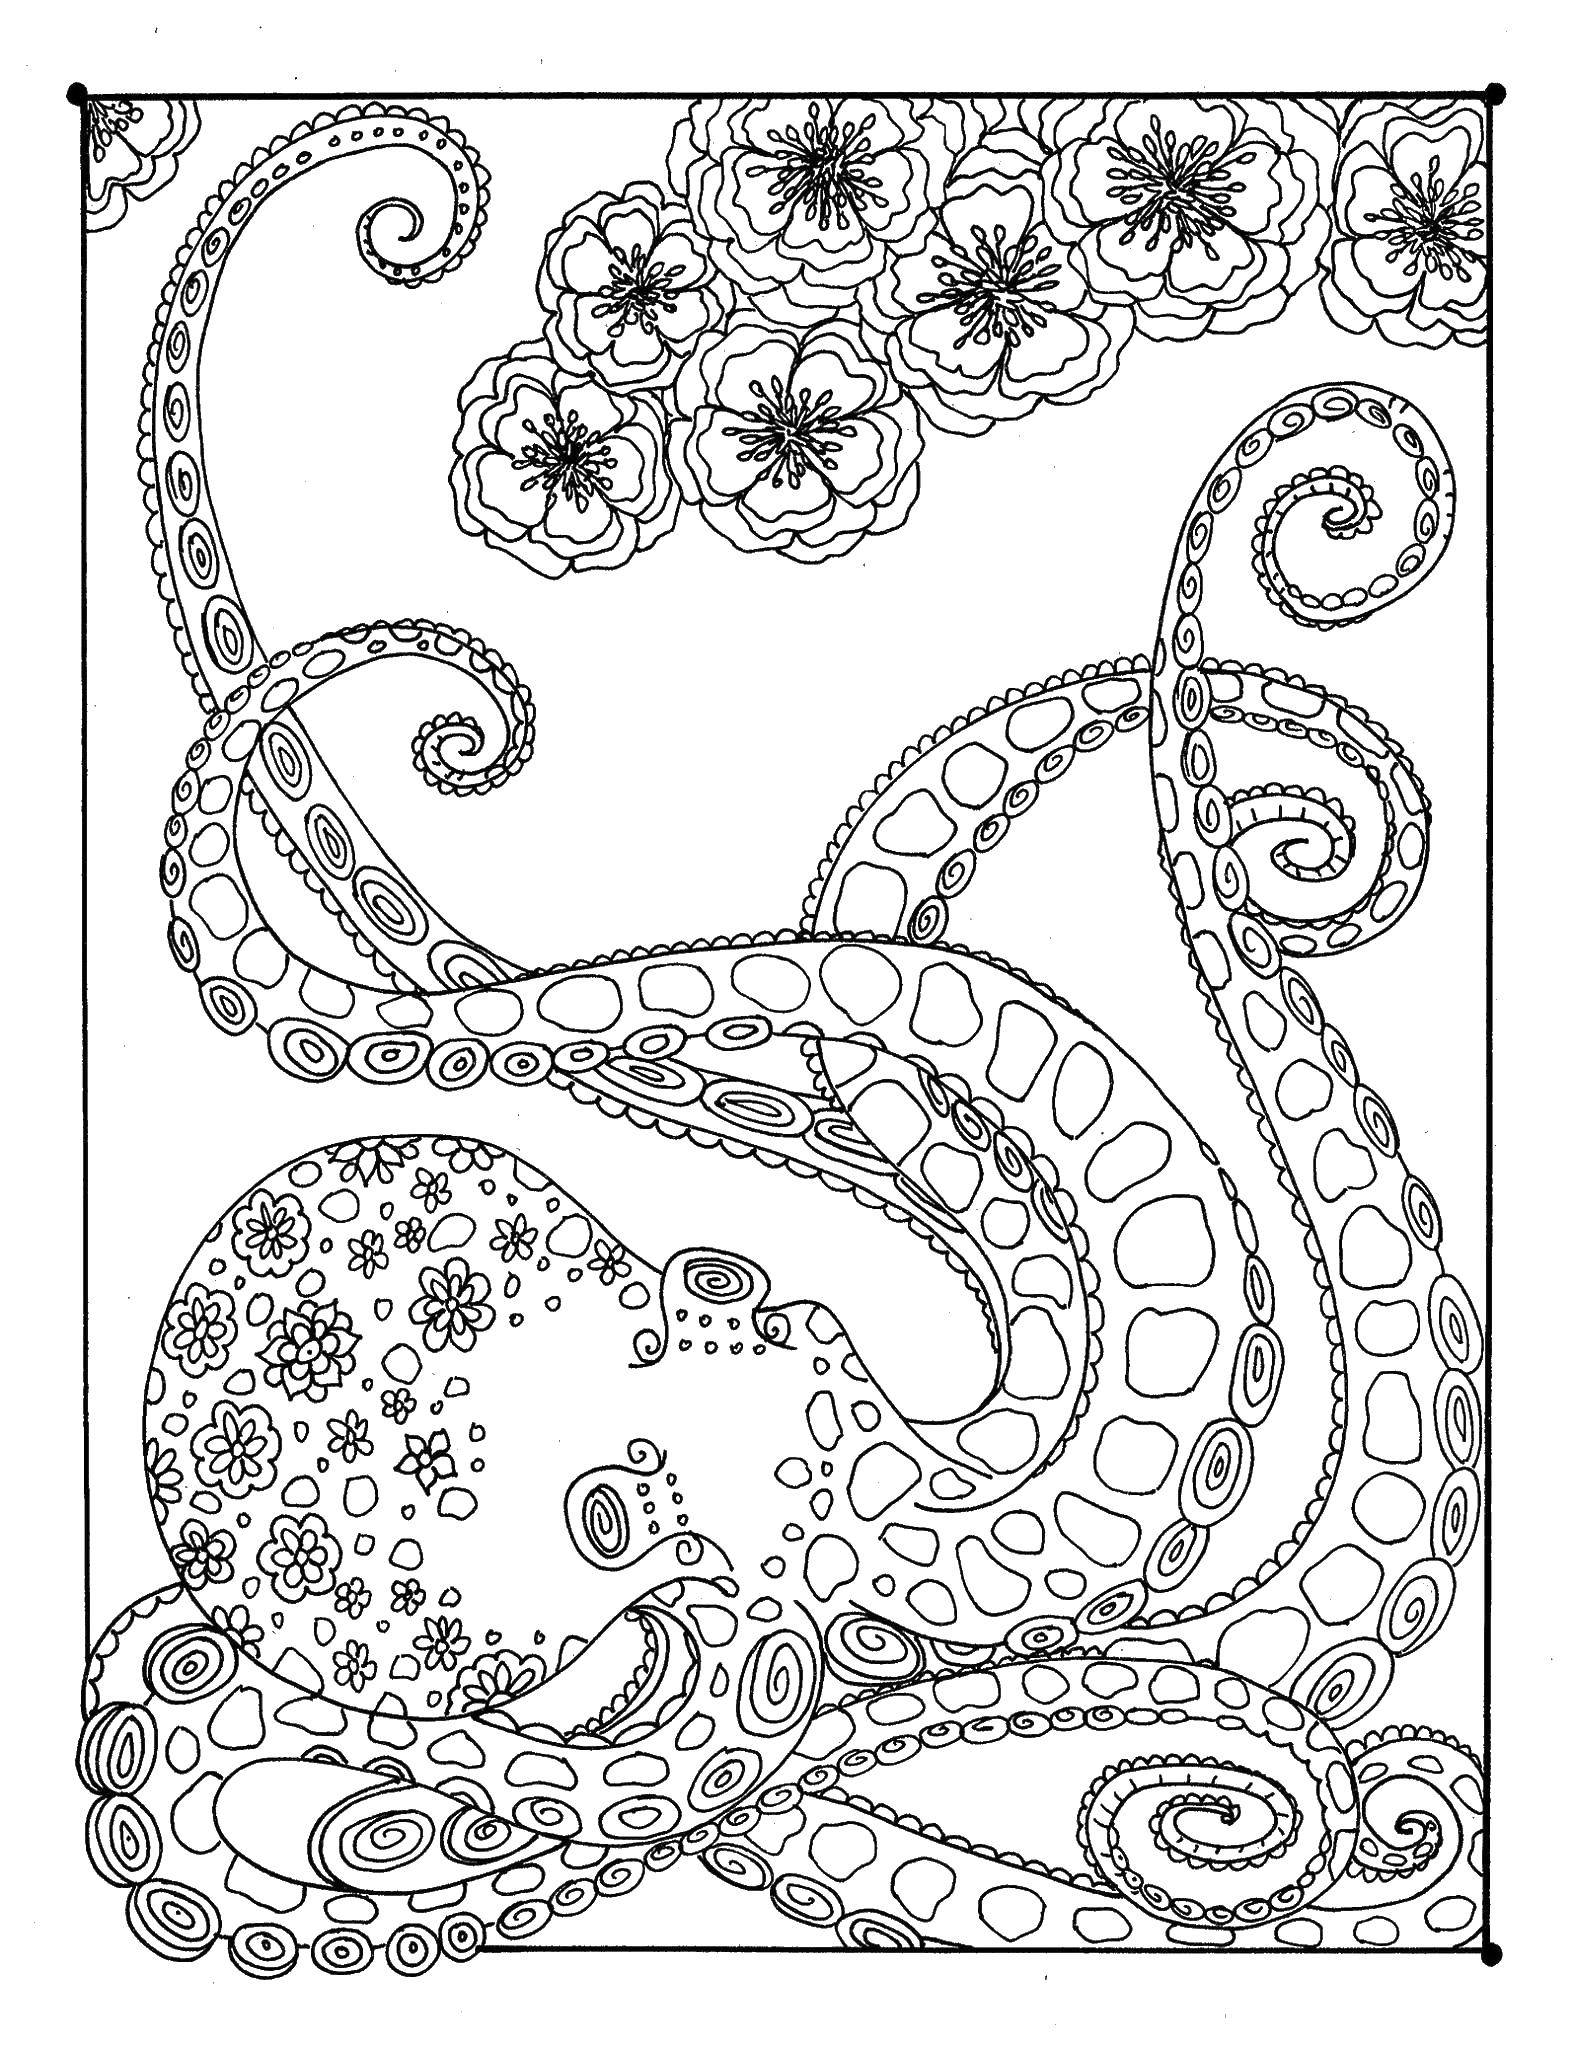 Coloring Patterns, octopus. Category patterns. Tags:  patterns, shapes, stress relief.